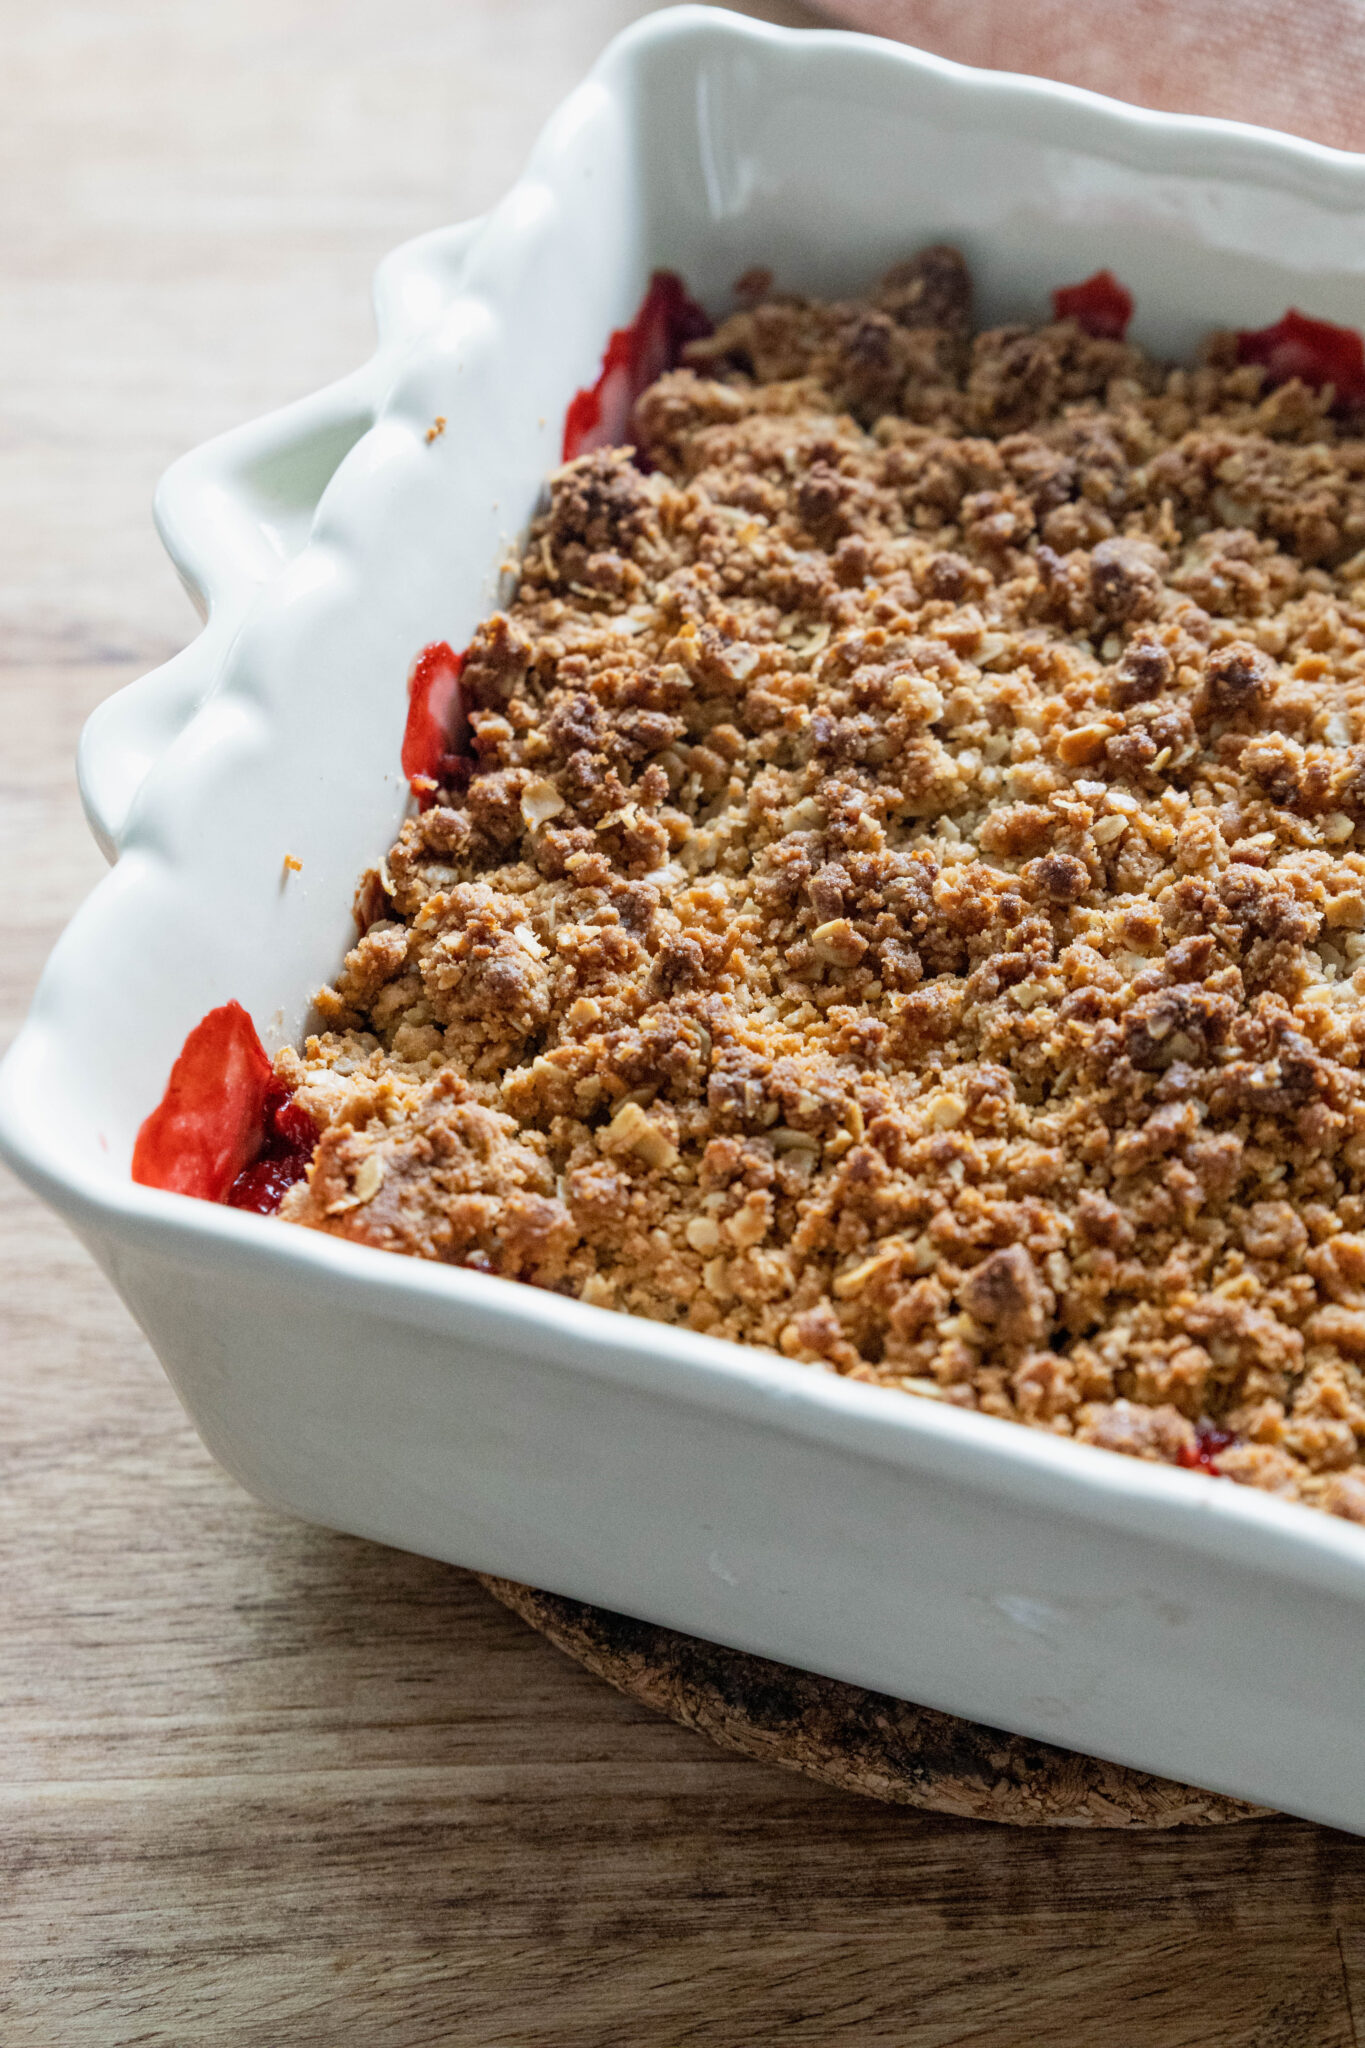 Best Strawberry Crumble Recipe (Easy to Make) - MAY EIGHTY FIVE